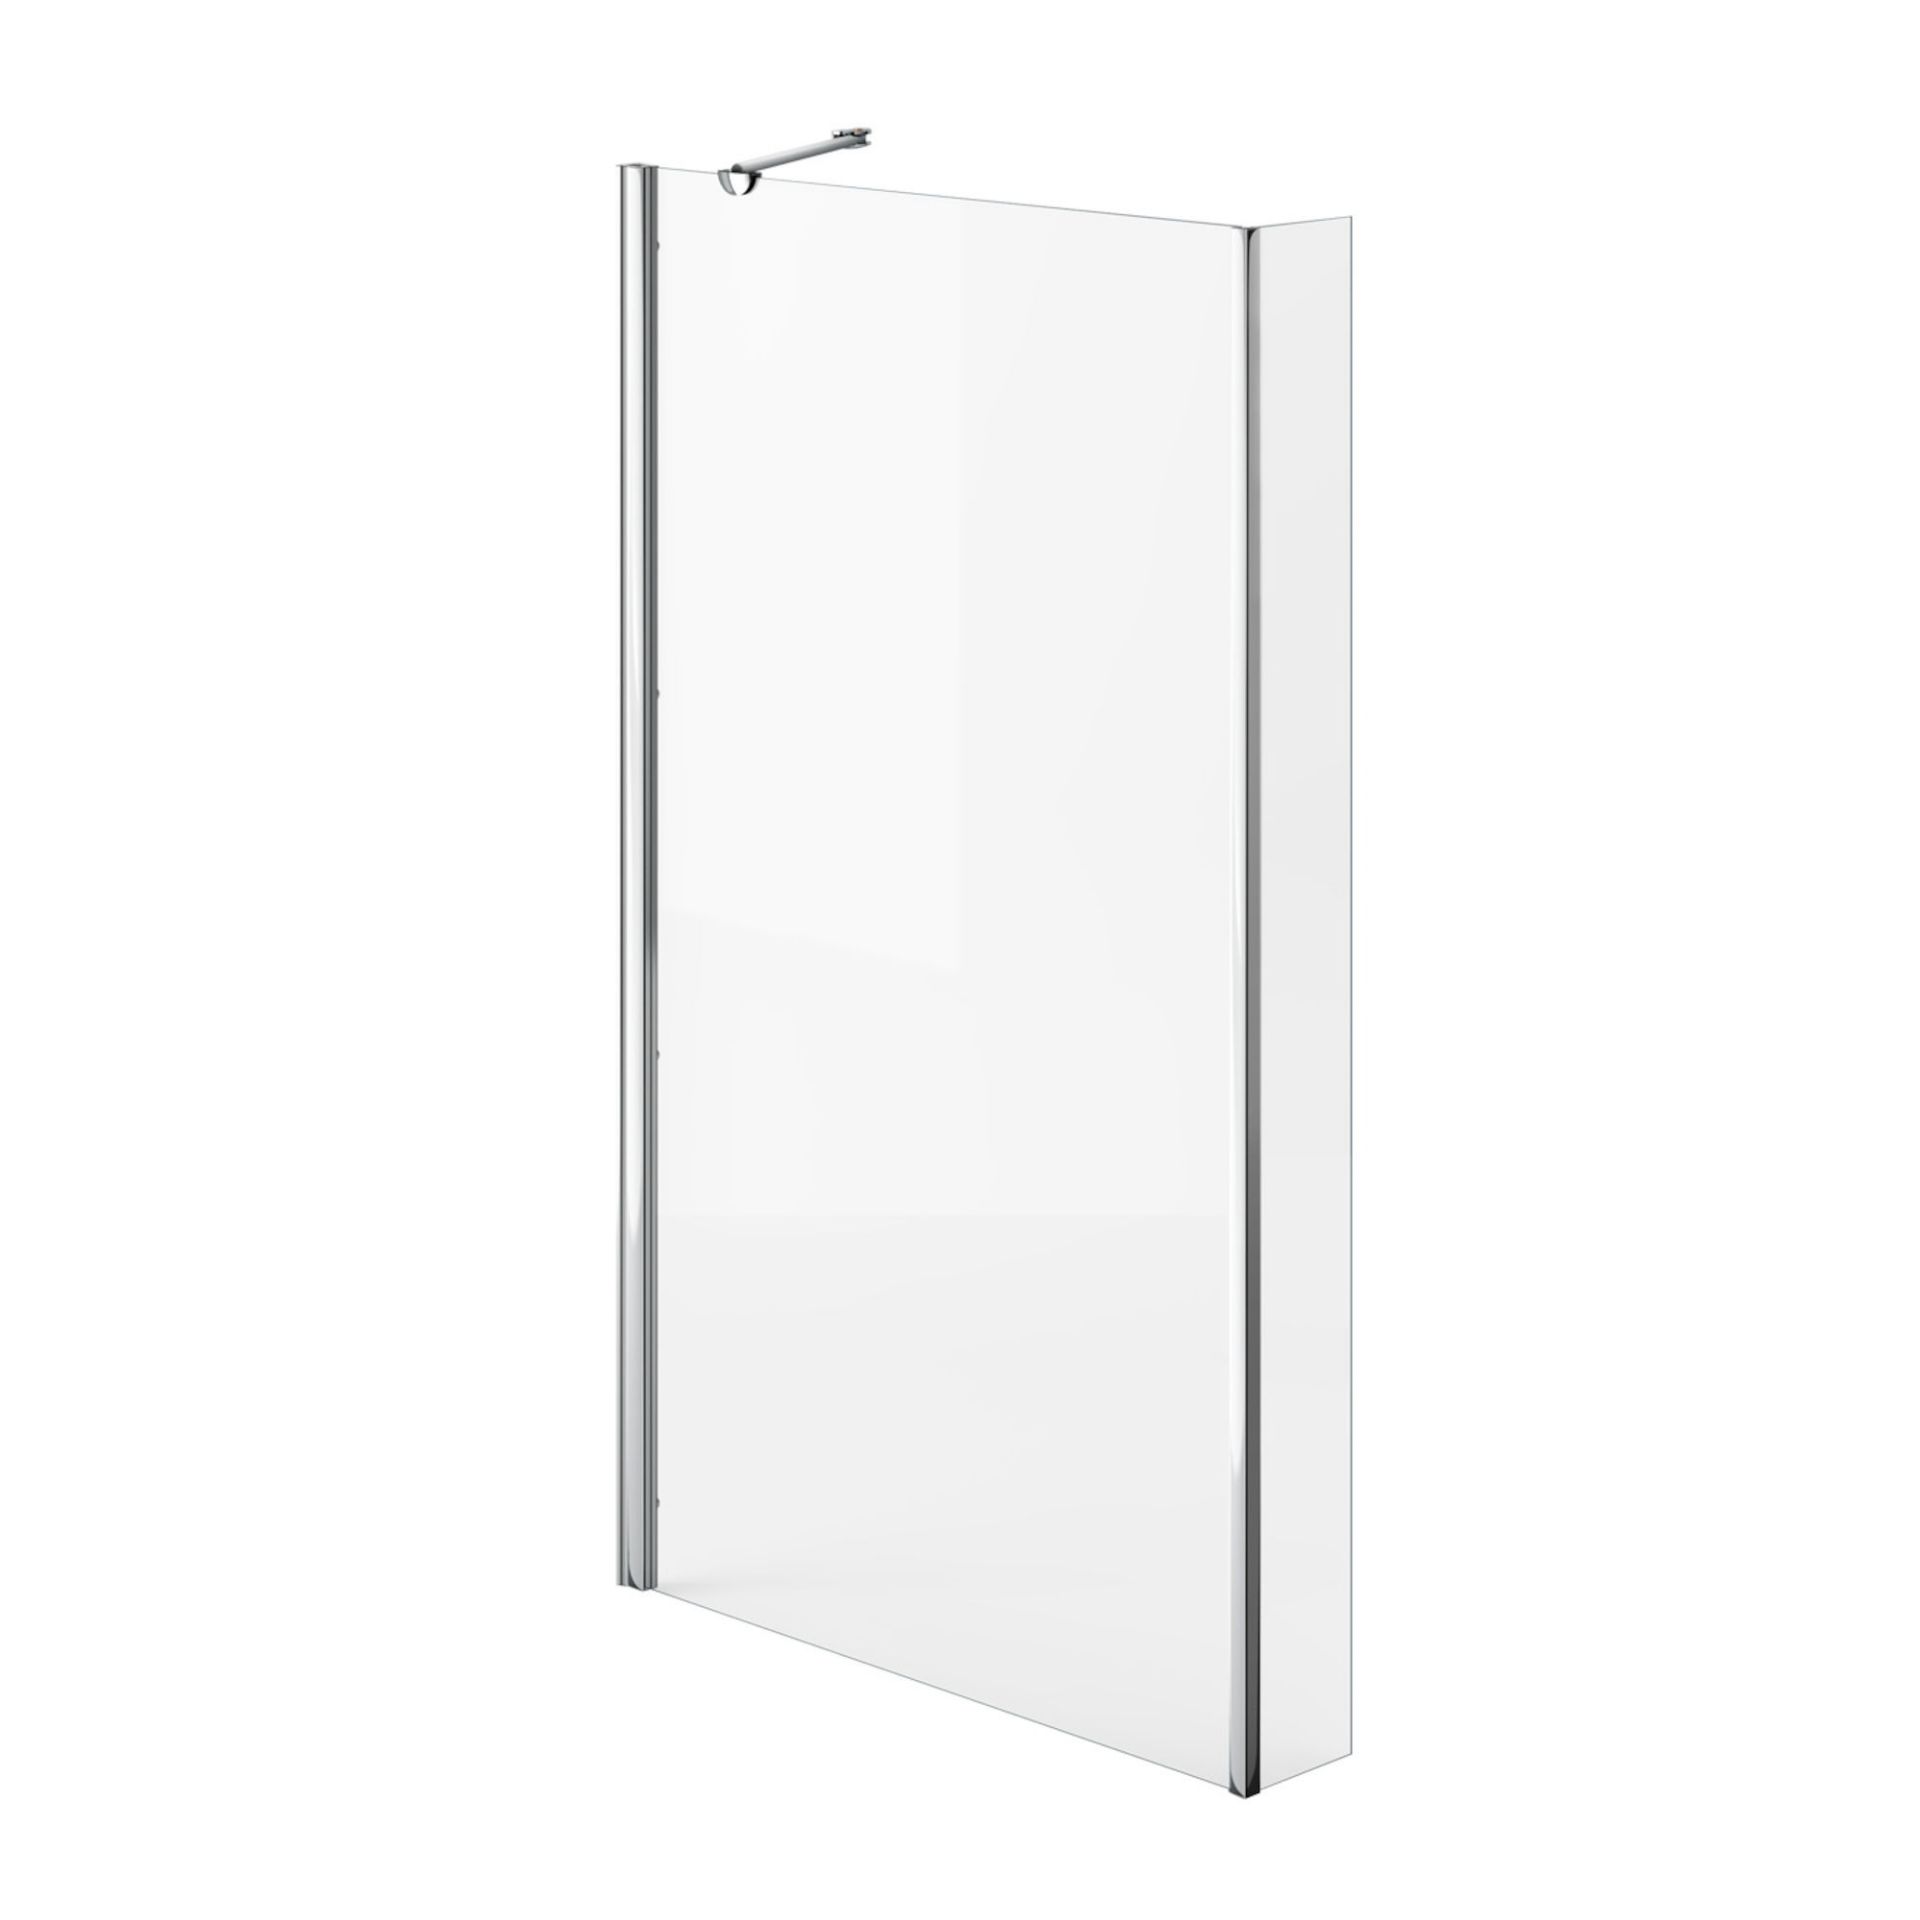 New (A163) 1500 mm L Shape Bath Screen. RRP £189.99.4 mm Tempered Safety Glass Screen Comes Co